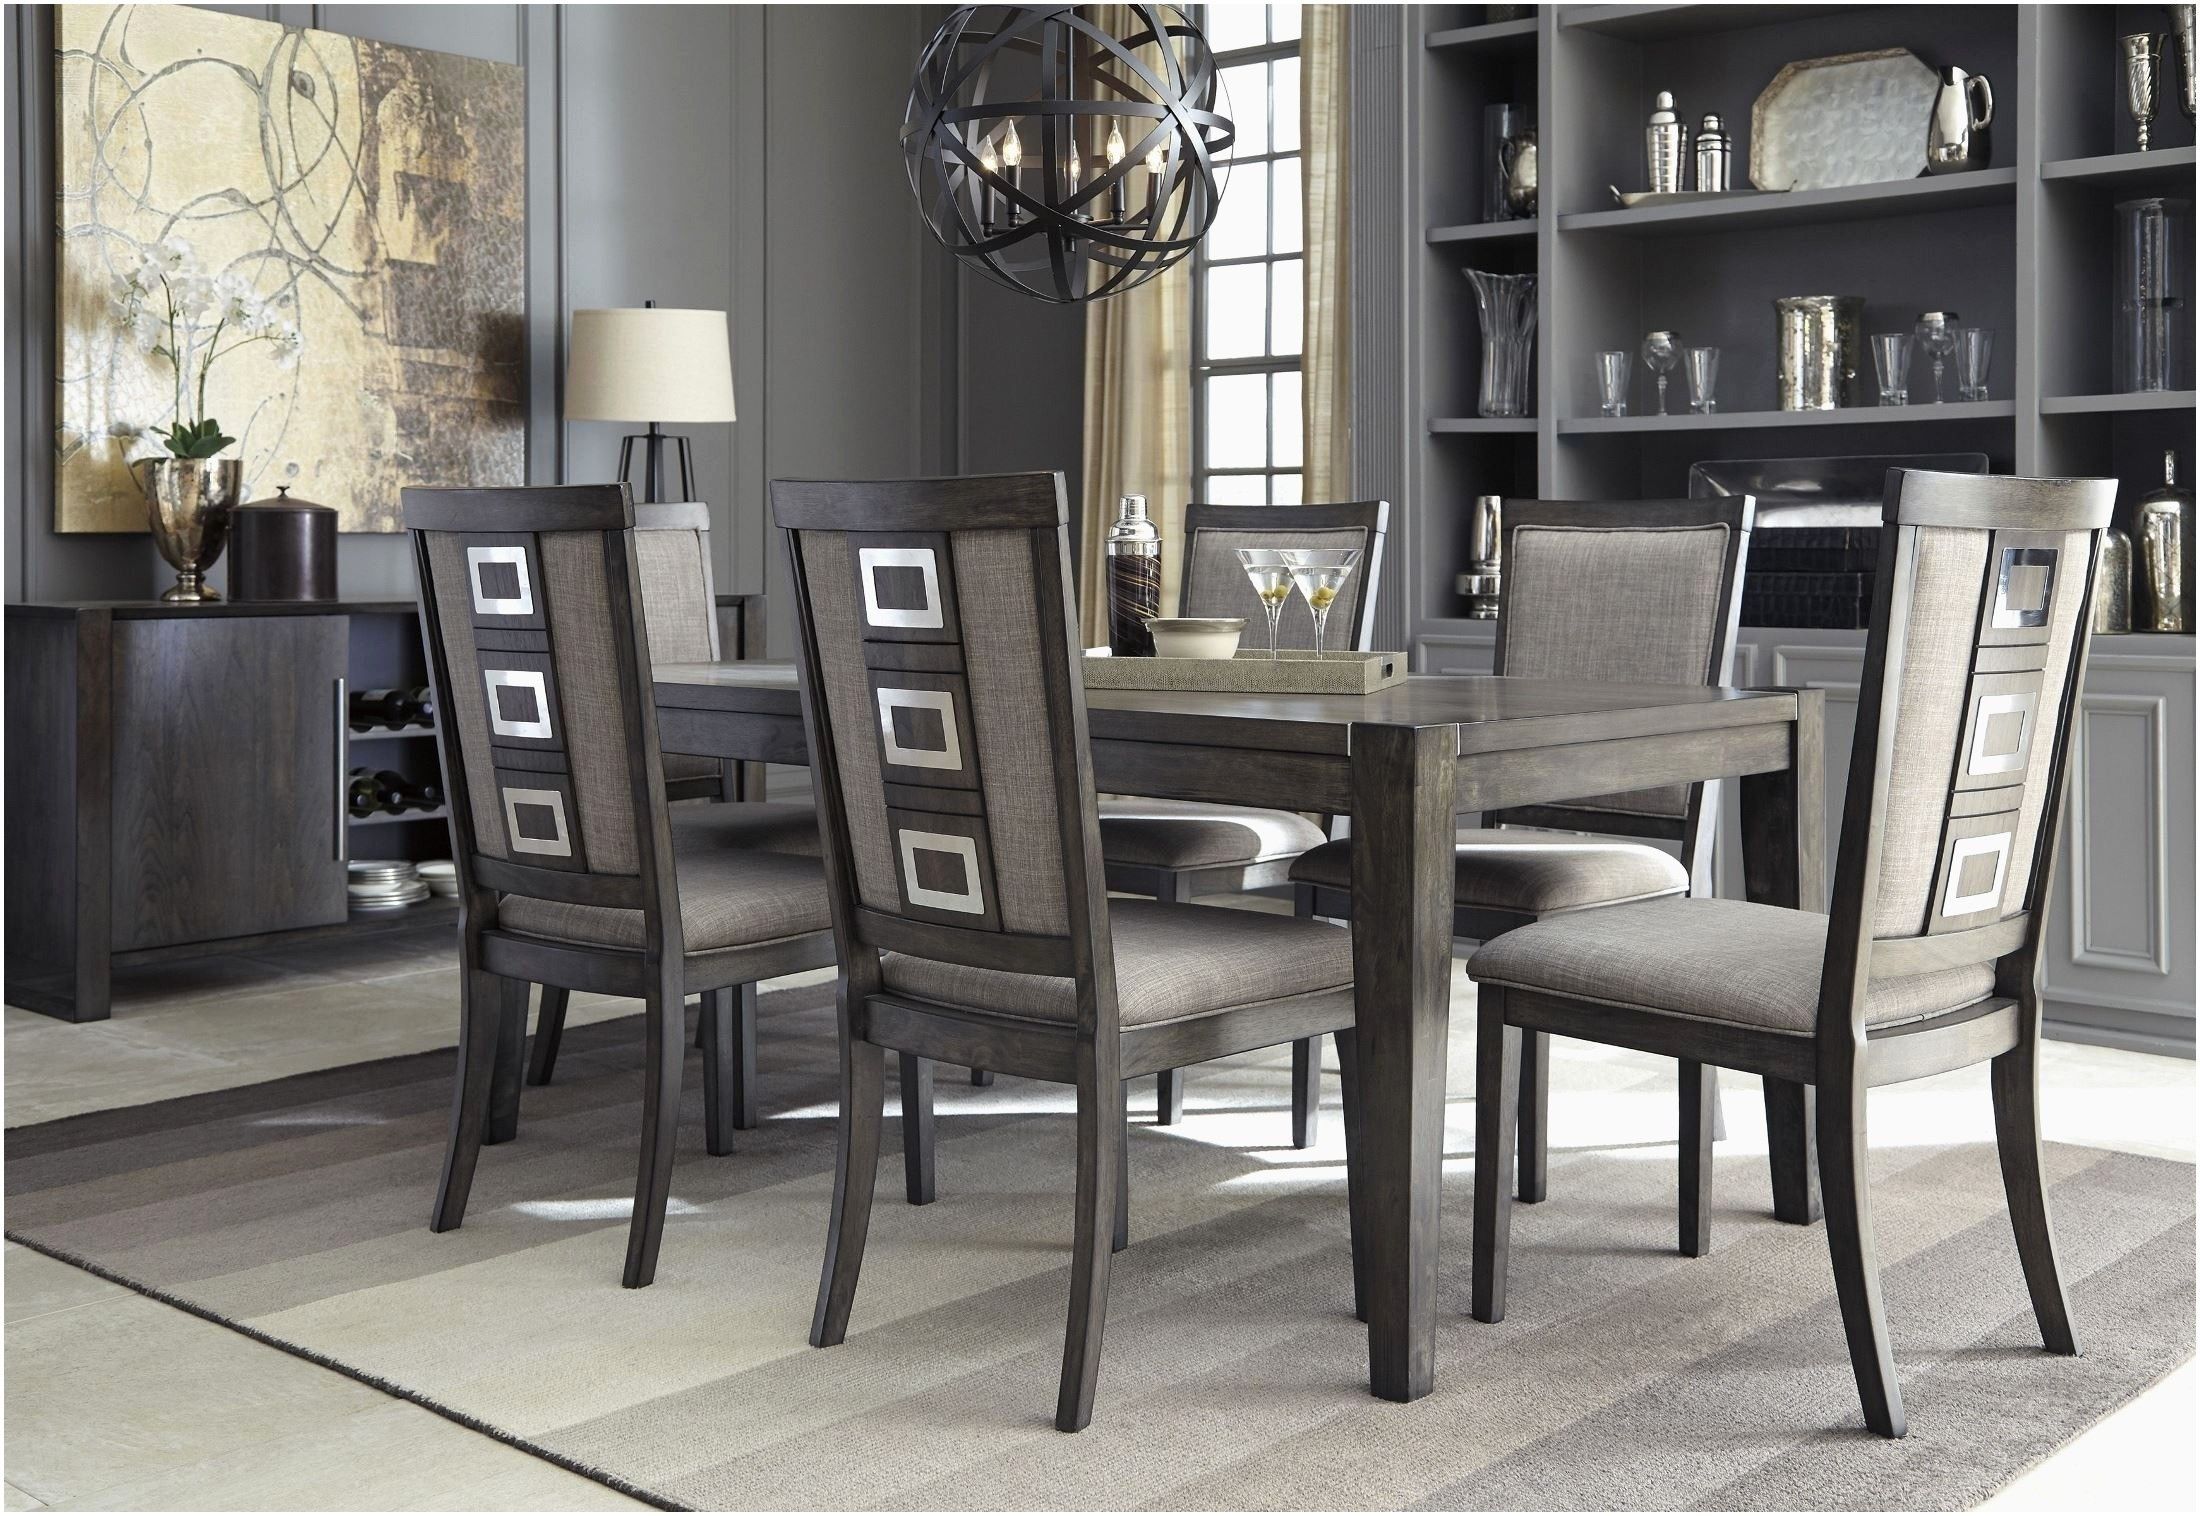 Engaging Grand Dining Room At Chapleau Extension Dining Table Throughout 2018 Chapleau Extension Dining Tables (View 13 of 20)